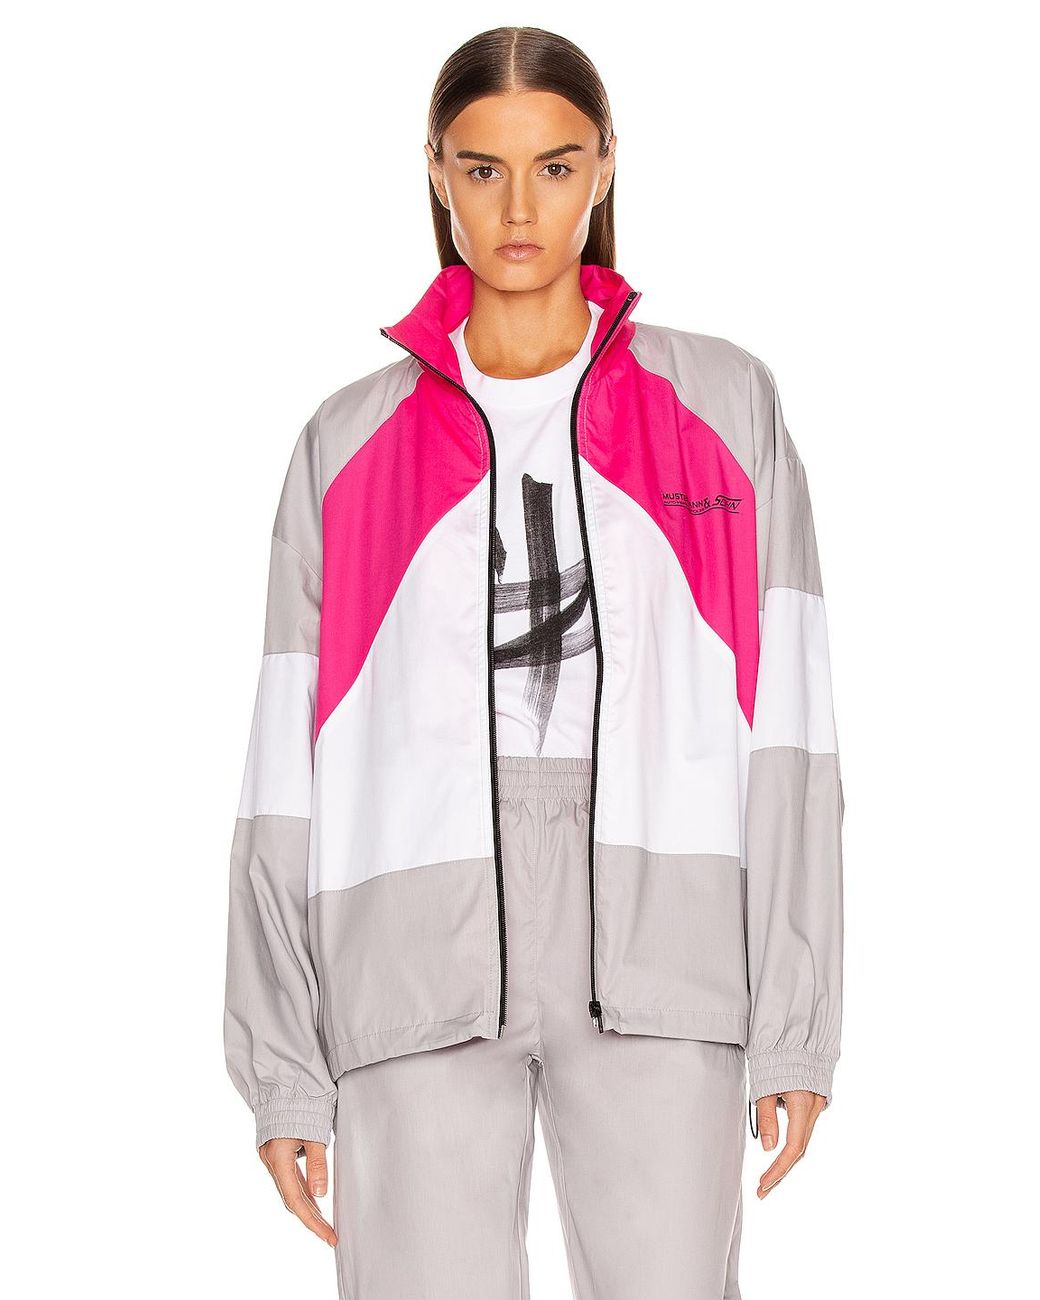 Vetements Synthetic Tracksuit Jacket in Grey & Pink & White (Pink) - Lyst